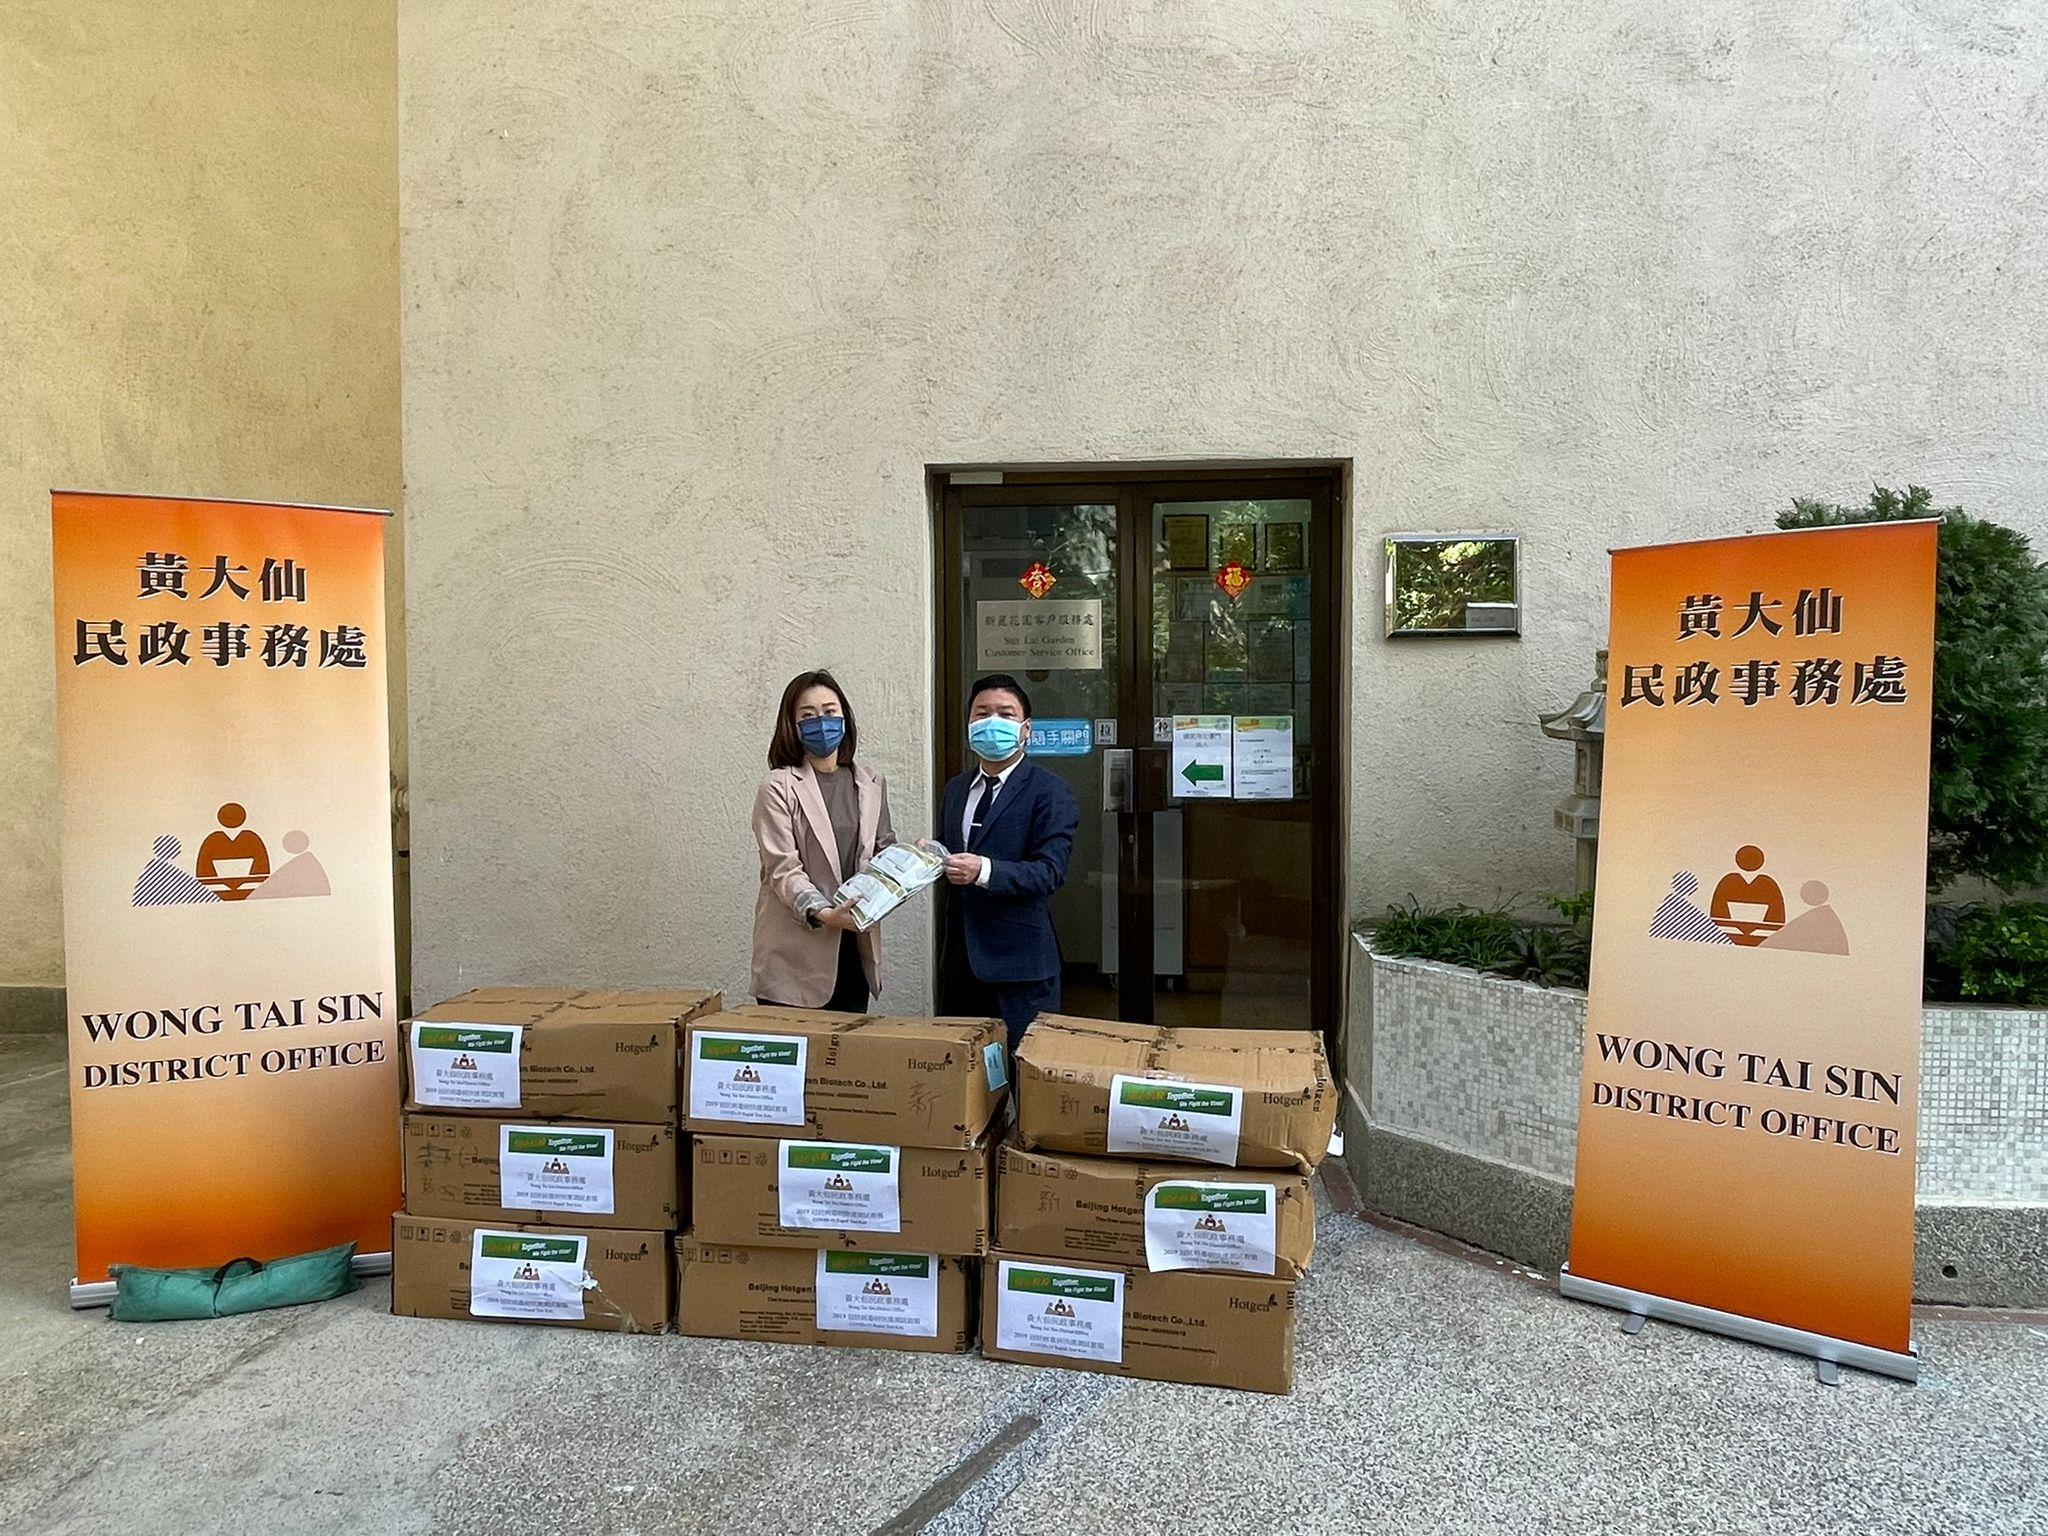 The Wong Tai Sin District Office today (March 8) distributed COVID-19 rapid test kits to households, cleansing workers and property management staff living and working in Sun Lai Garden for voluntary testing through the property management company.